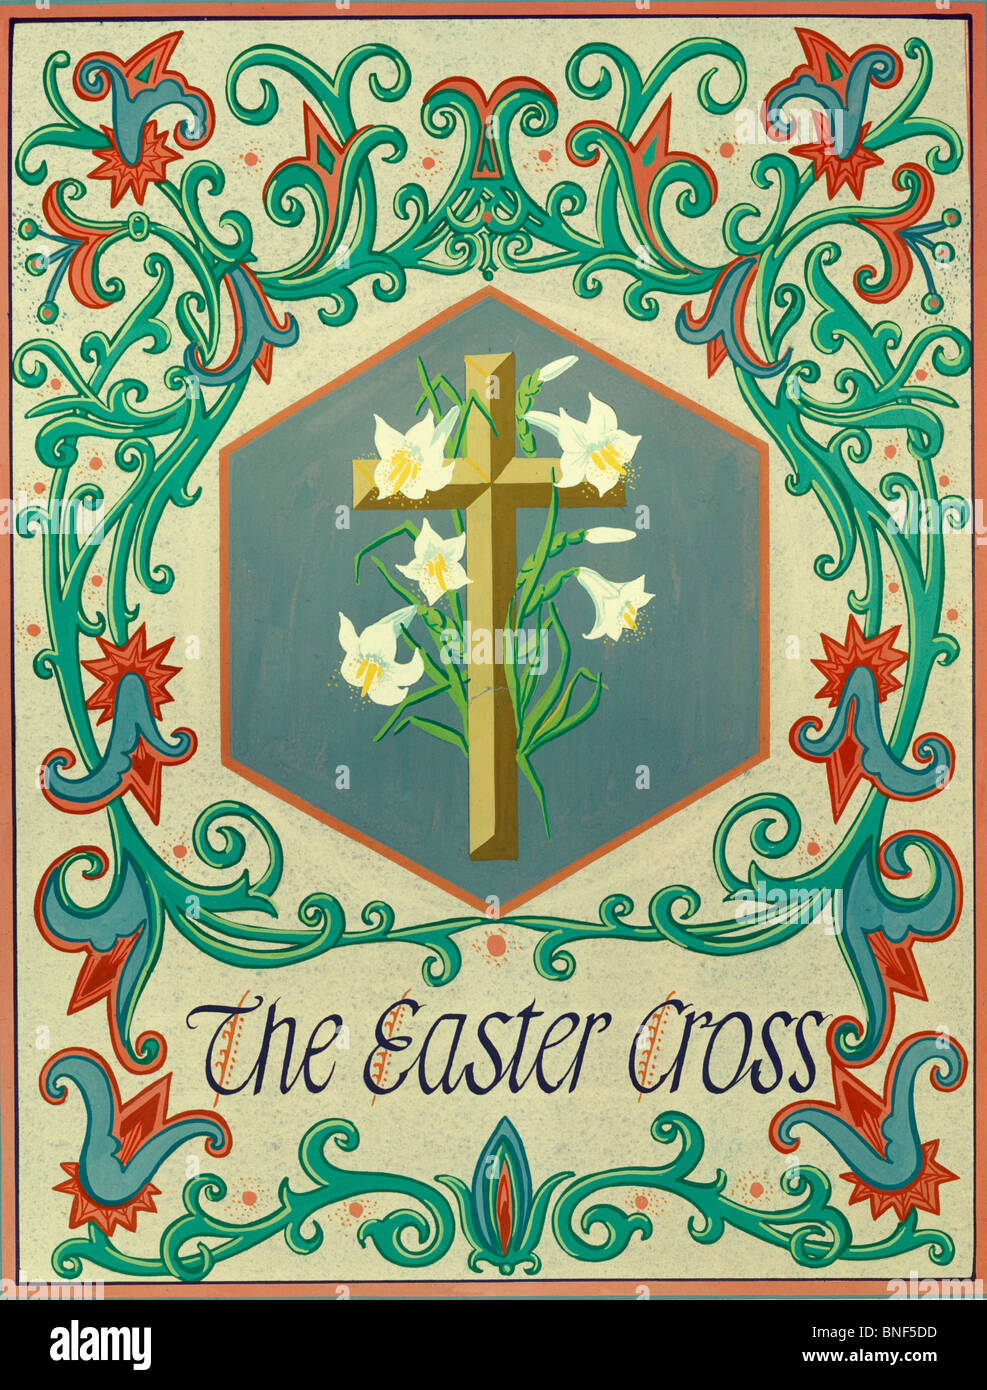 The Easter Cross by Roberto Tapelloni, 20th Century Stock Photo